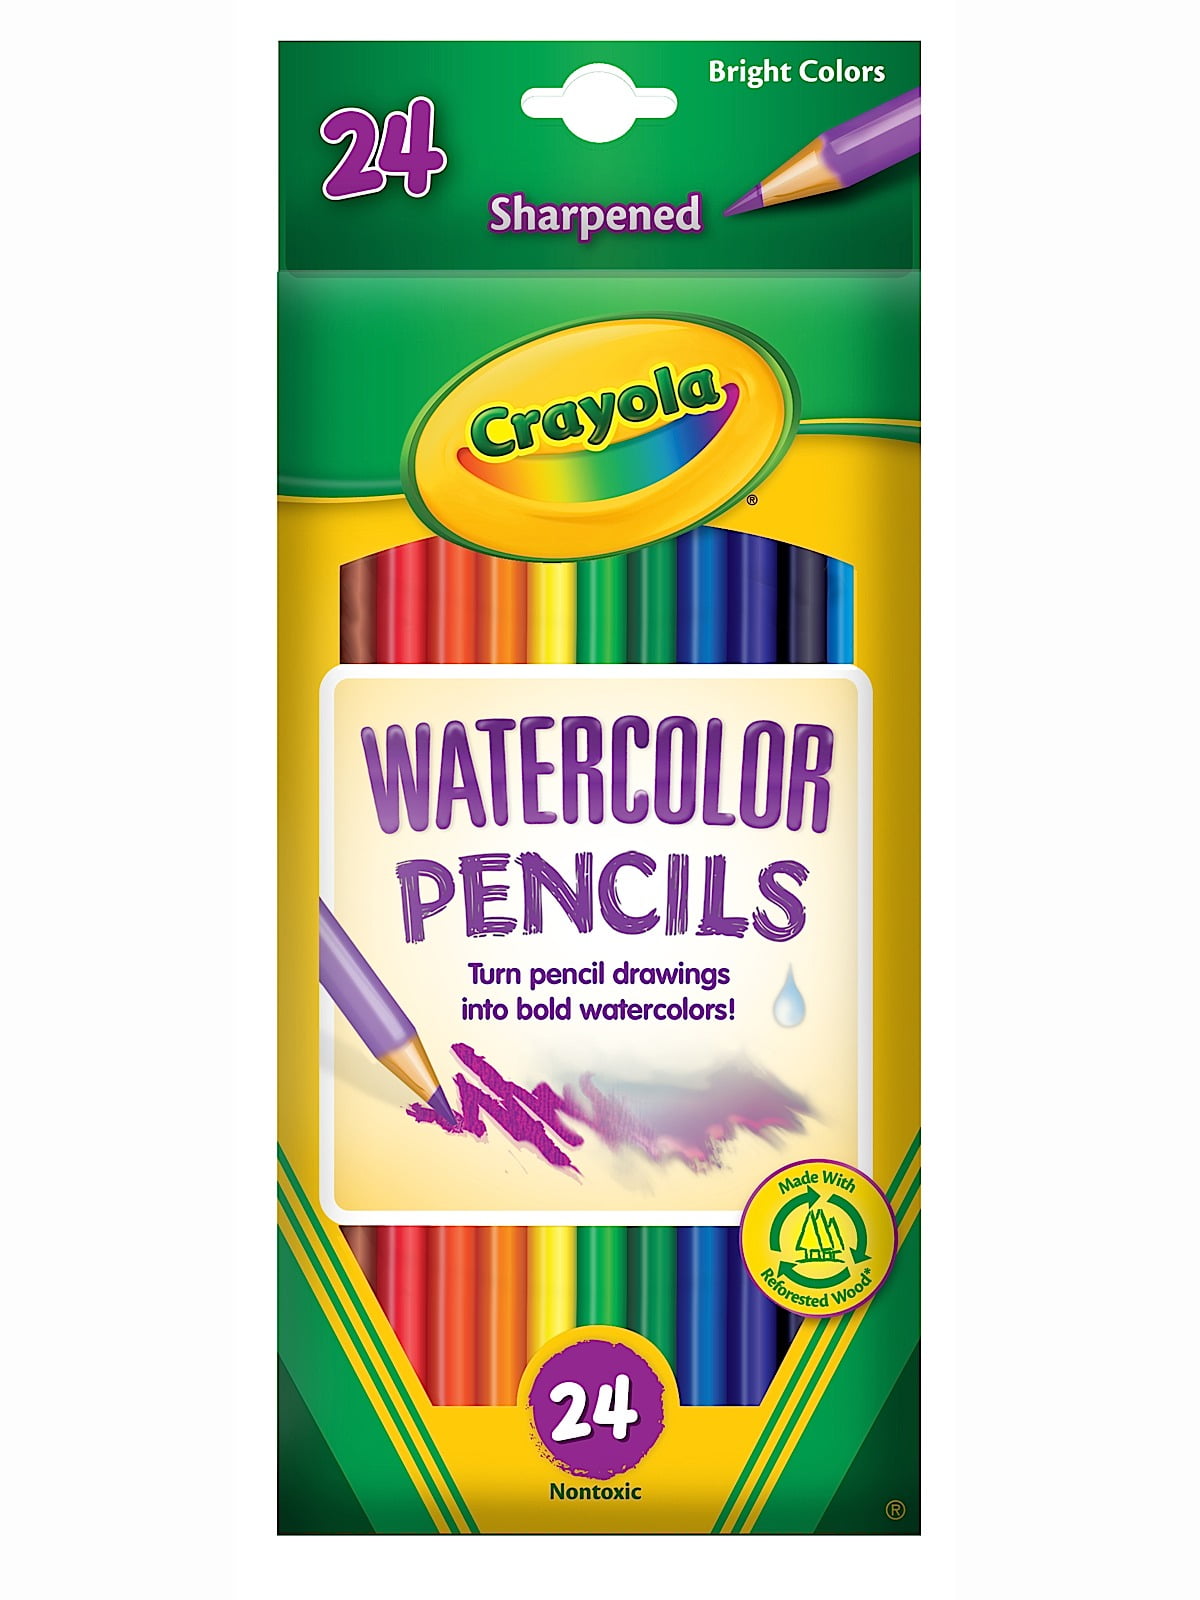 Crayola Colors Of The World 24 Count Colored Pencils